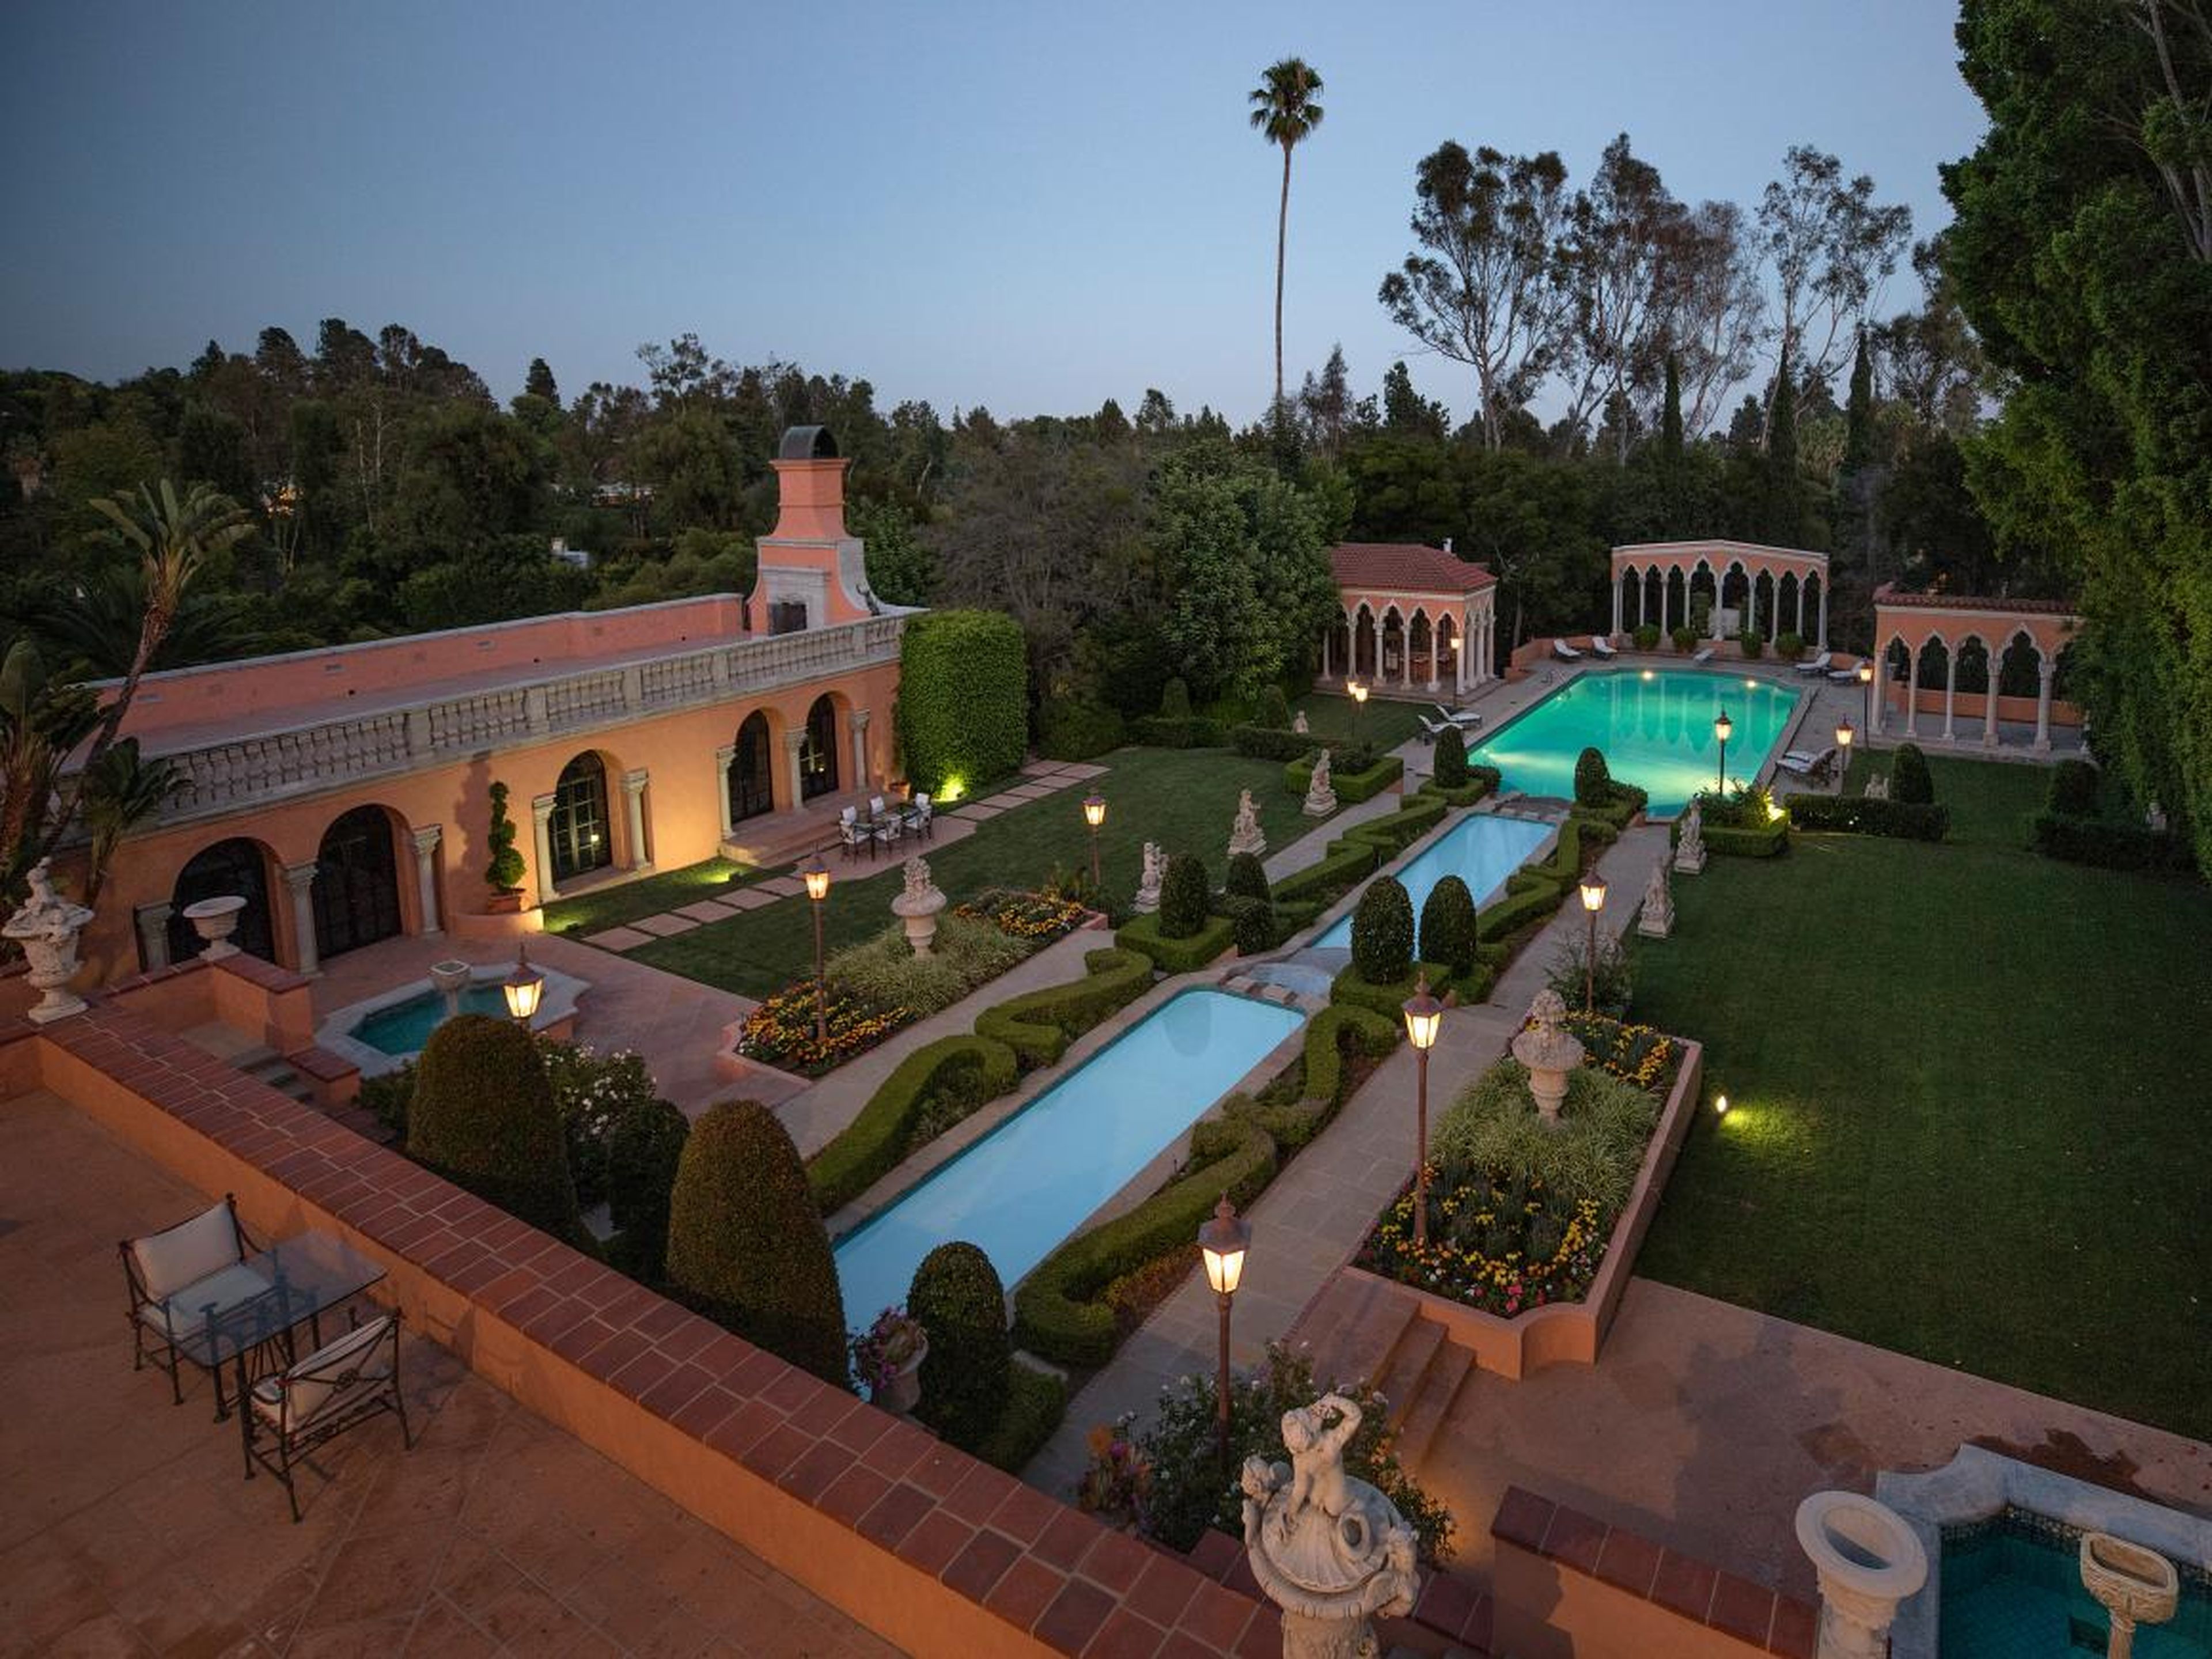 The sprawling estate, built in 1927, sits on 3.5 acres in Beverly Hills.